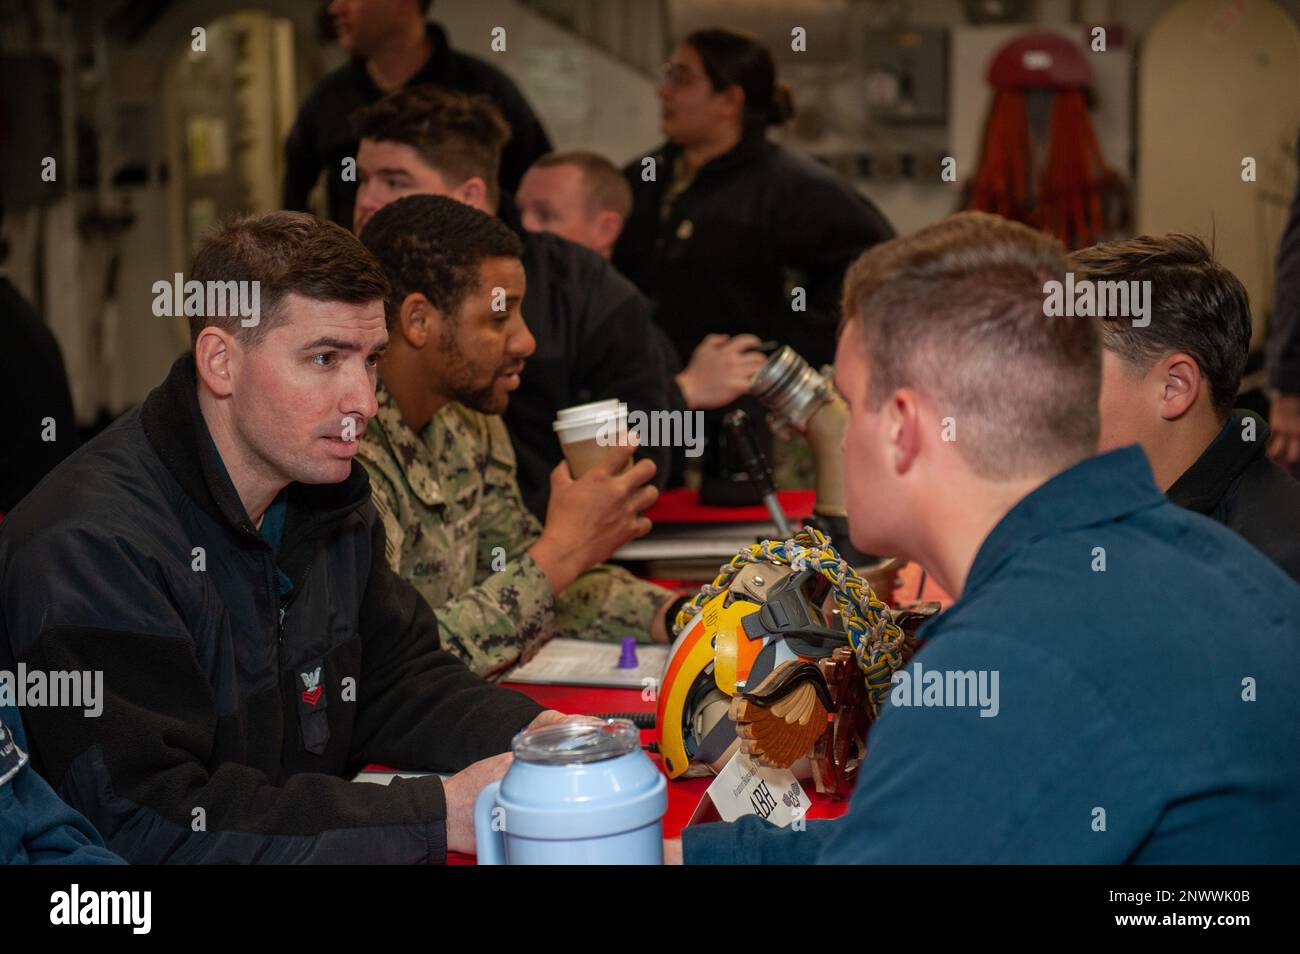 SAN DIEGO (Feb. 9, 2023) Sailors explore different career paths within the Navy during a career fair held on the mess decks aboard USS Boxer (LHD 4).  Boxer is a Wasp-class amphibious assault ship home ported in San Diego. Stock Photo